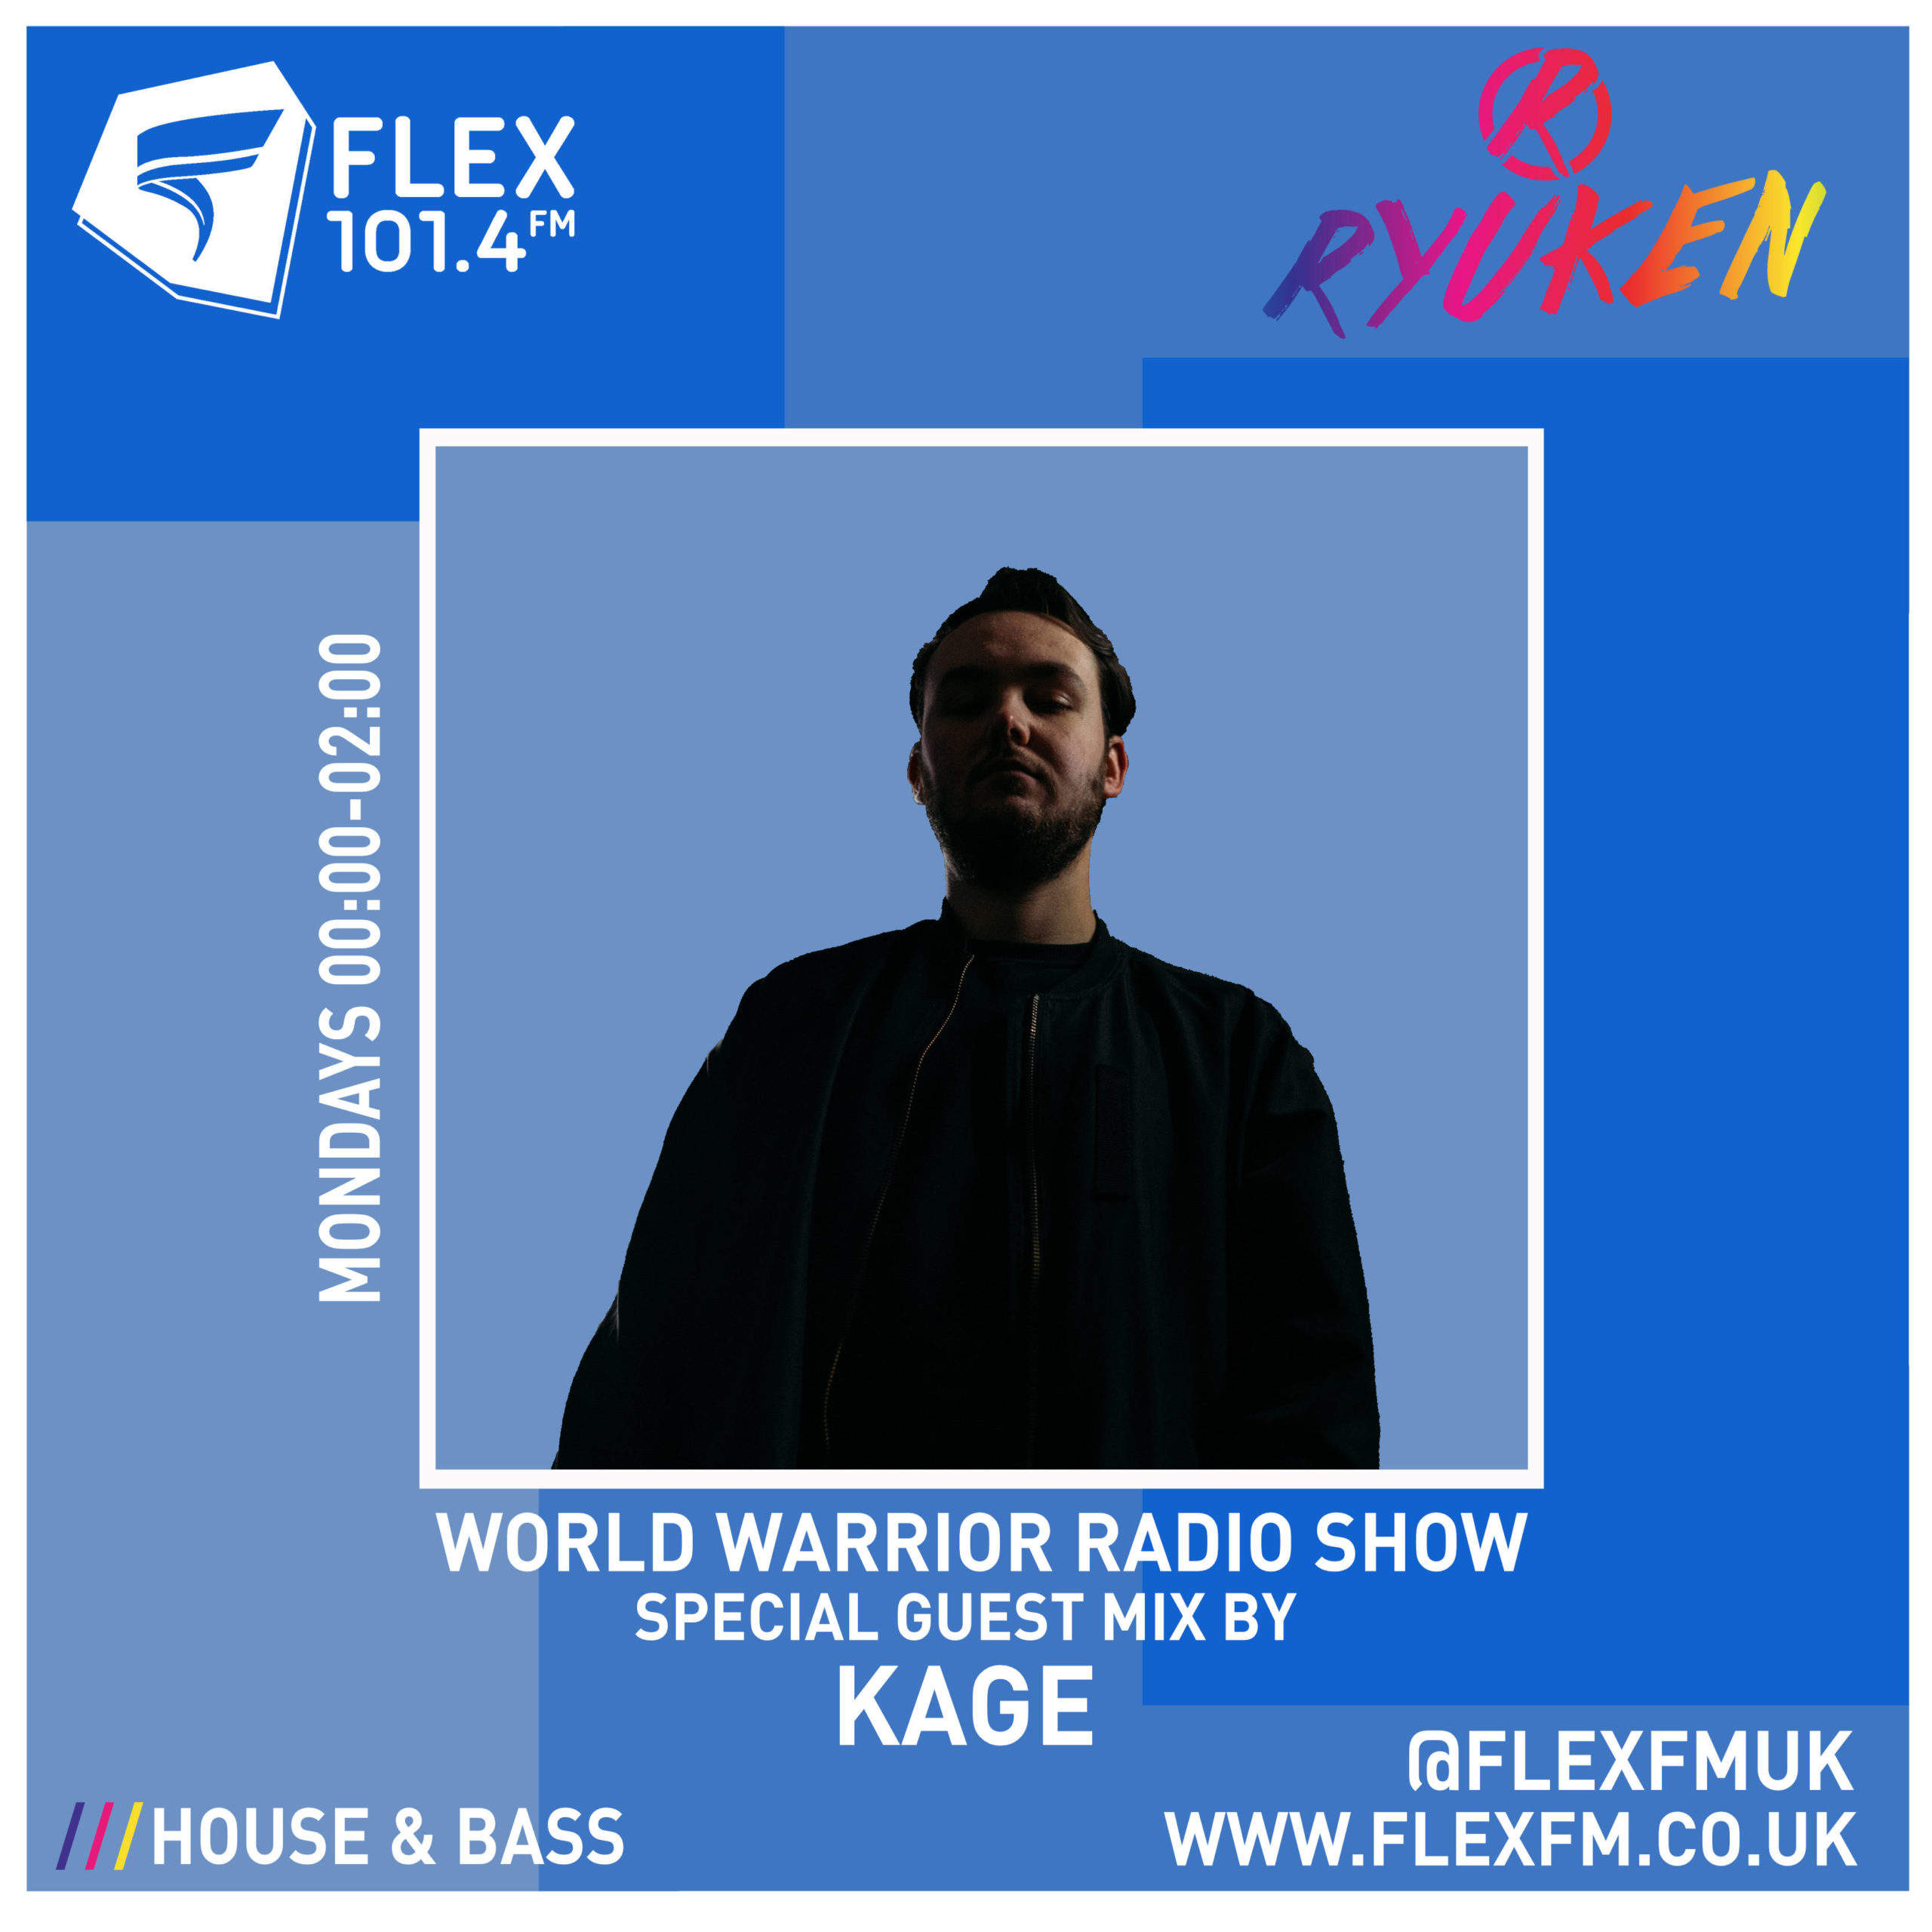 Kage guest mix with Ryuken – Monday 29th June – 00:00-02:00